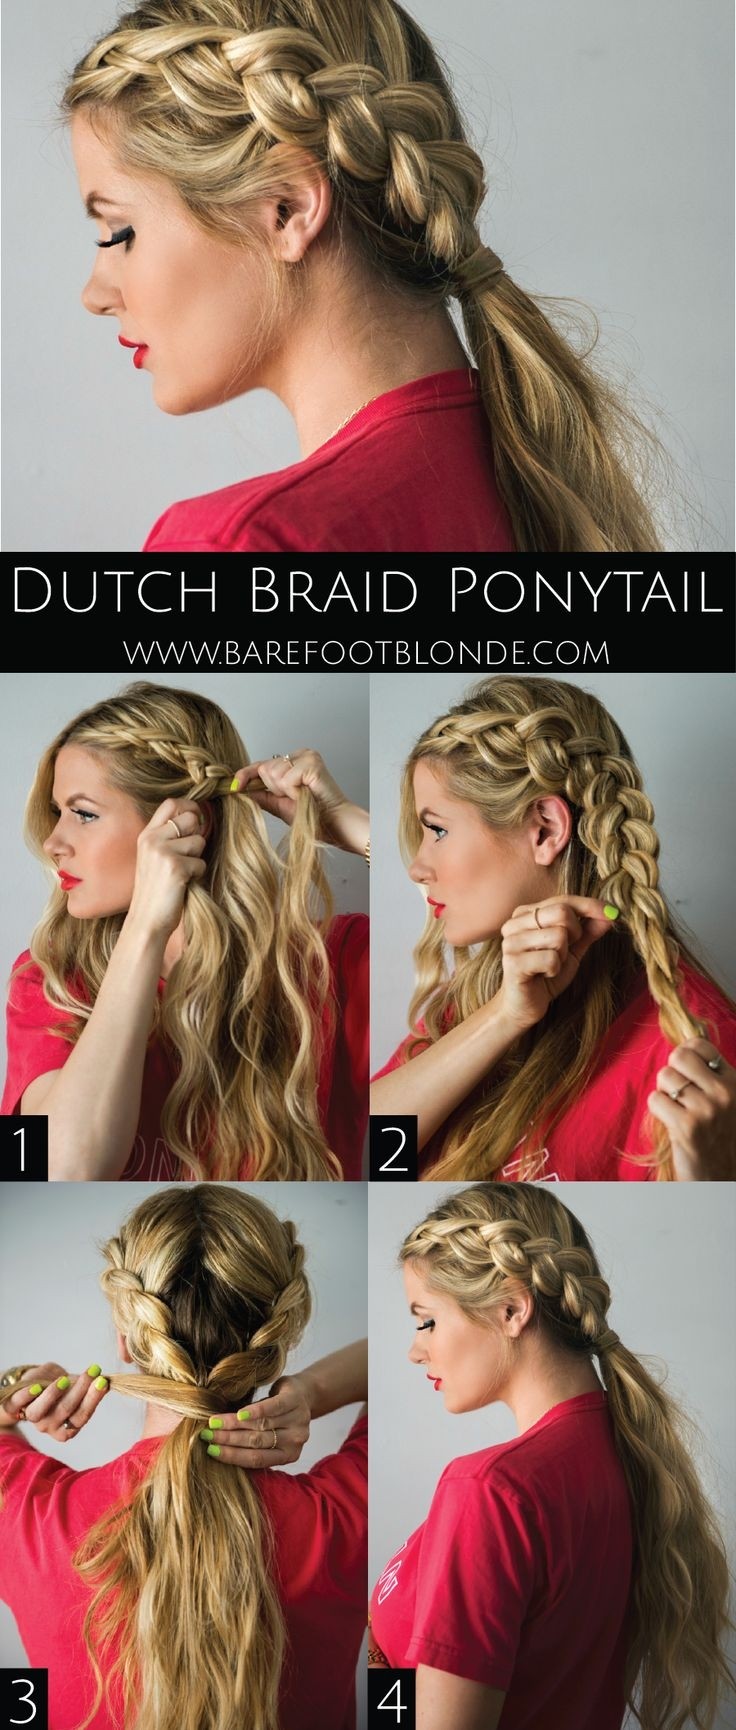 20 Ponytail Hairstyles: Discover Latest Ponytail Ideas Now! - PoPular